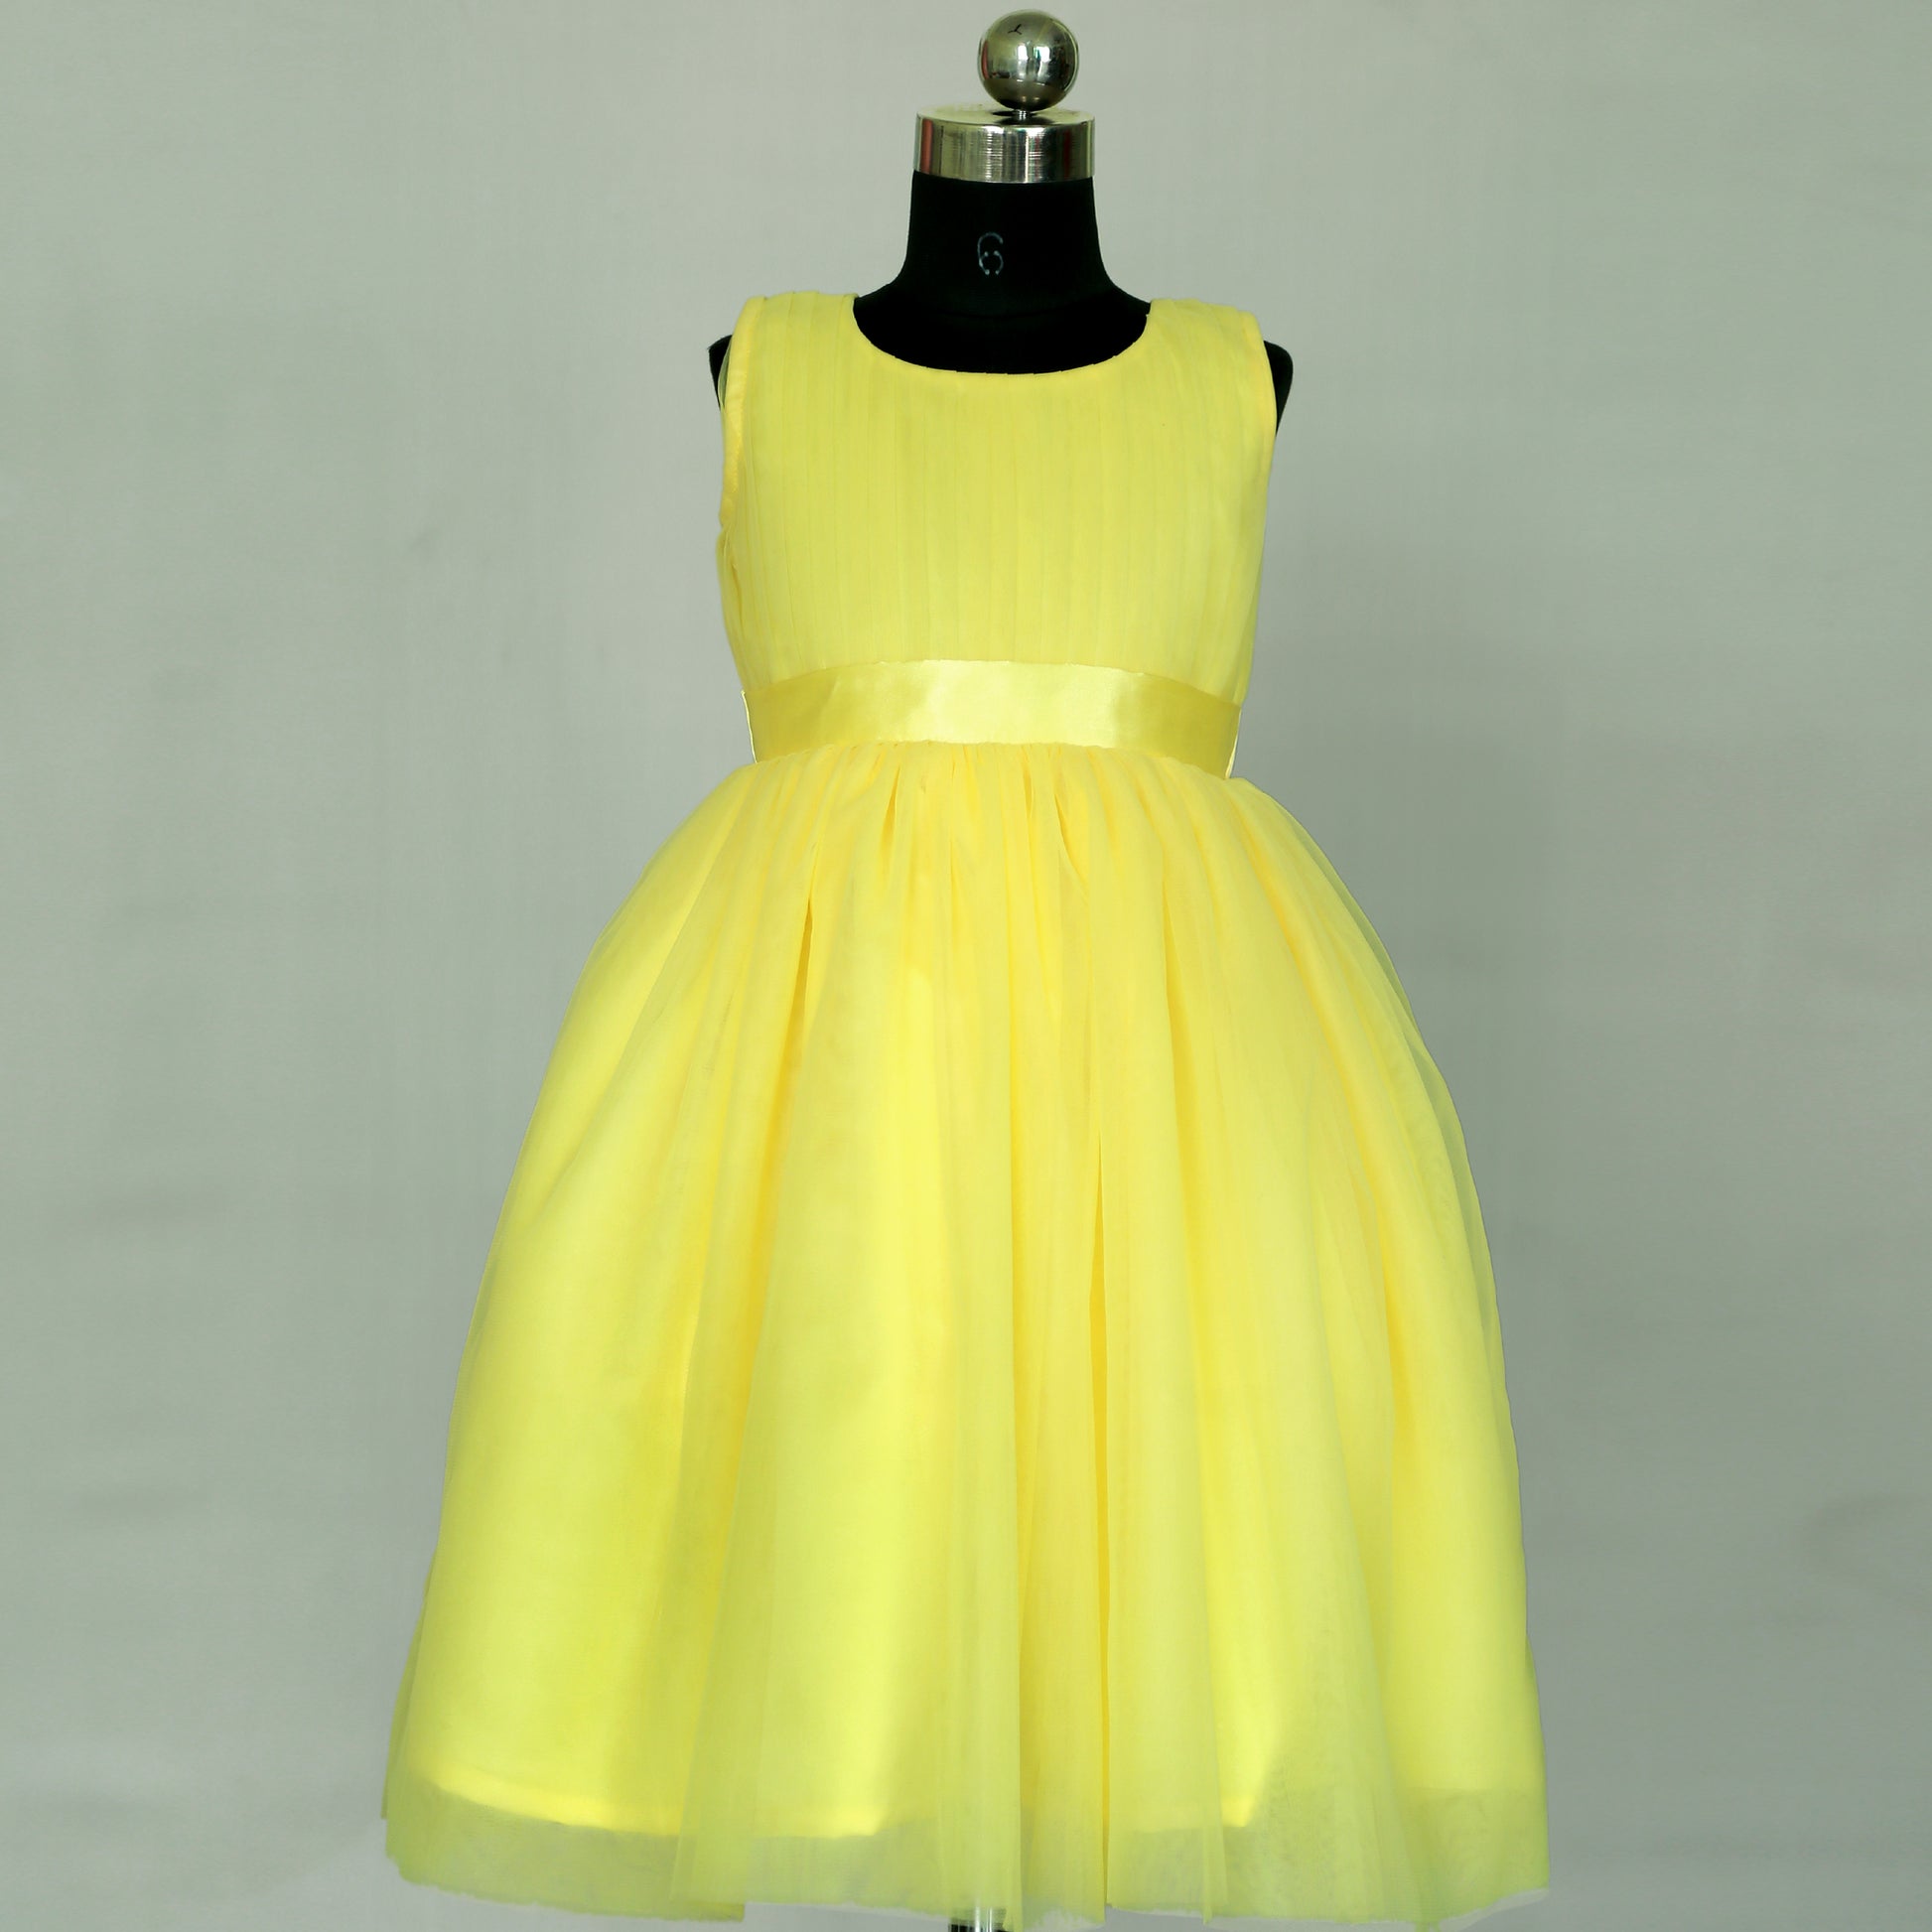 HEYKIDOO latest designer kids girls teens stylish comfortable Knee length birthday Party wear dress most beautiful party frocks occasional elegant yellow Solid frock birthday frocks online shopping fashionable elegant dress party 7 years stylish unique good quality trendy for gift purpose kids